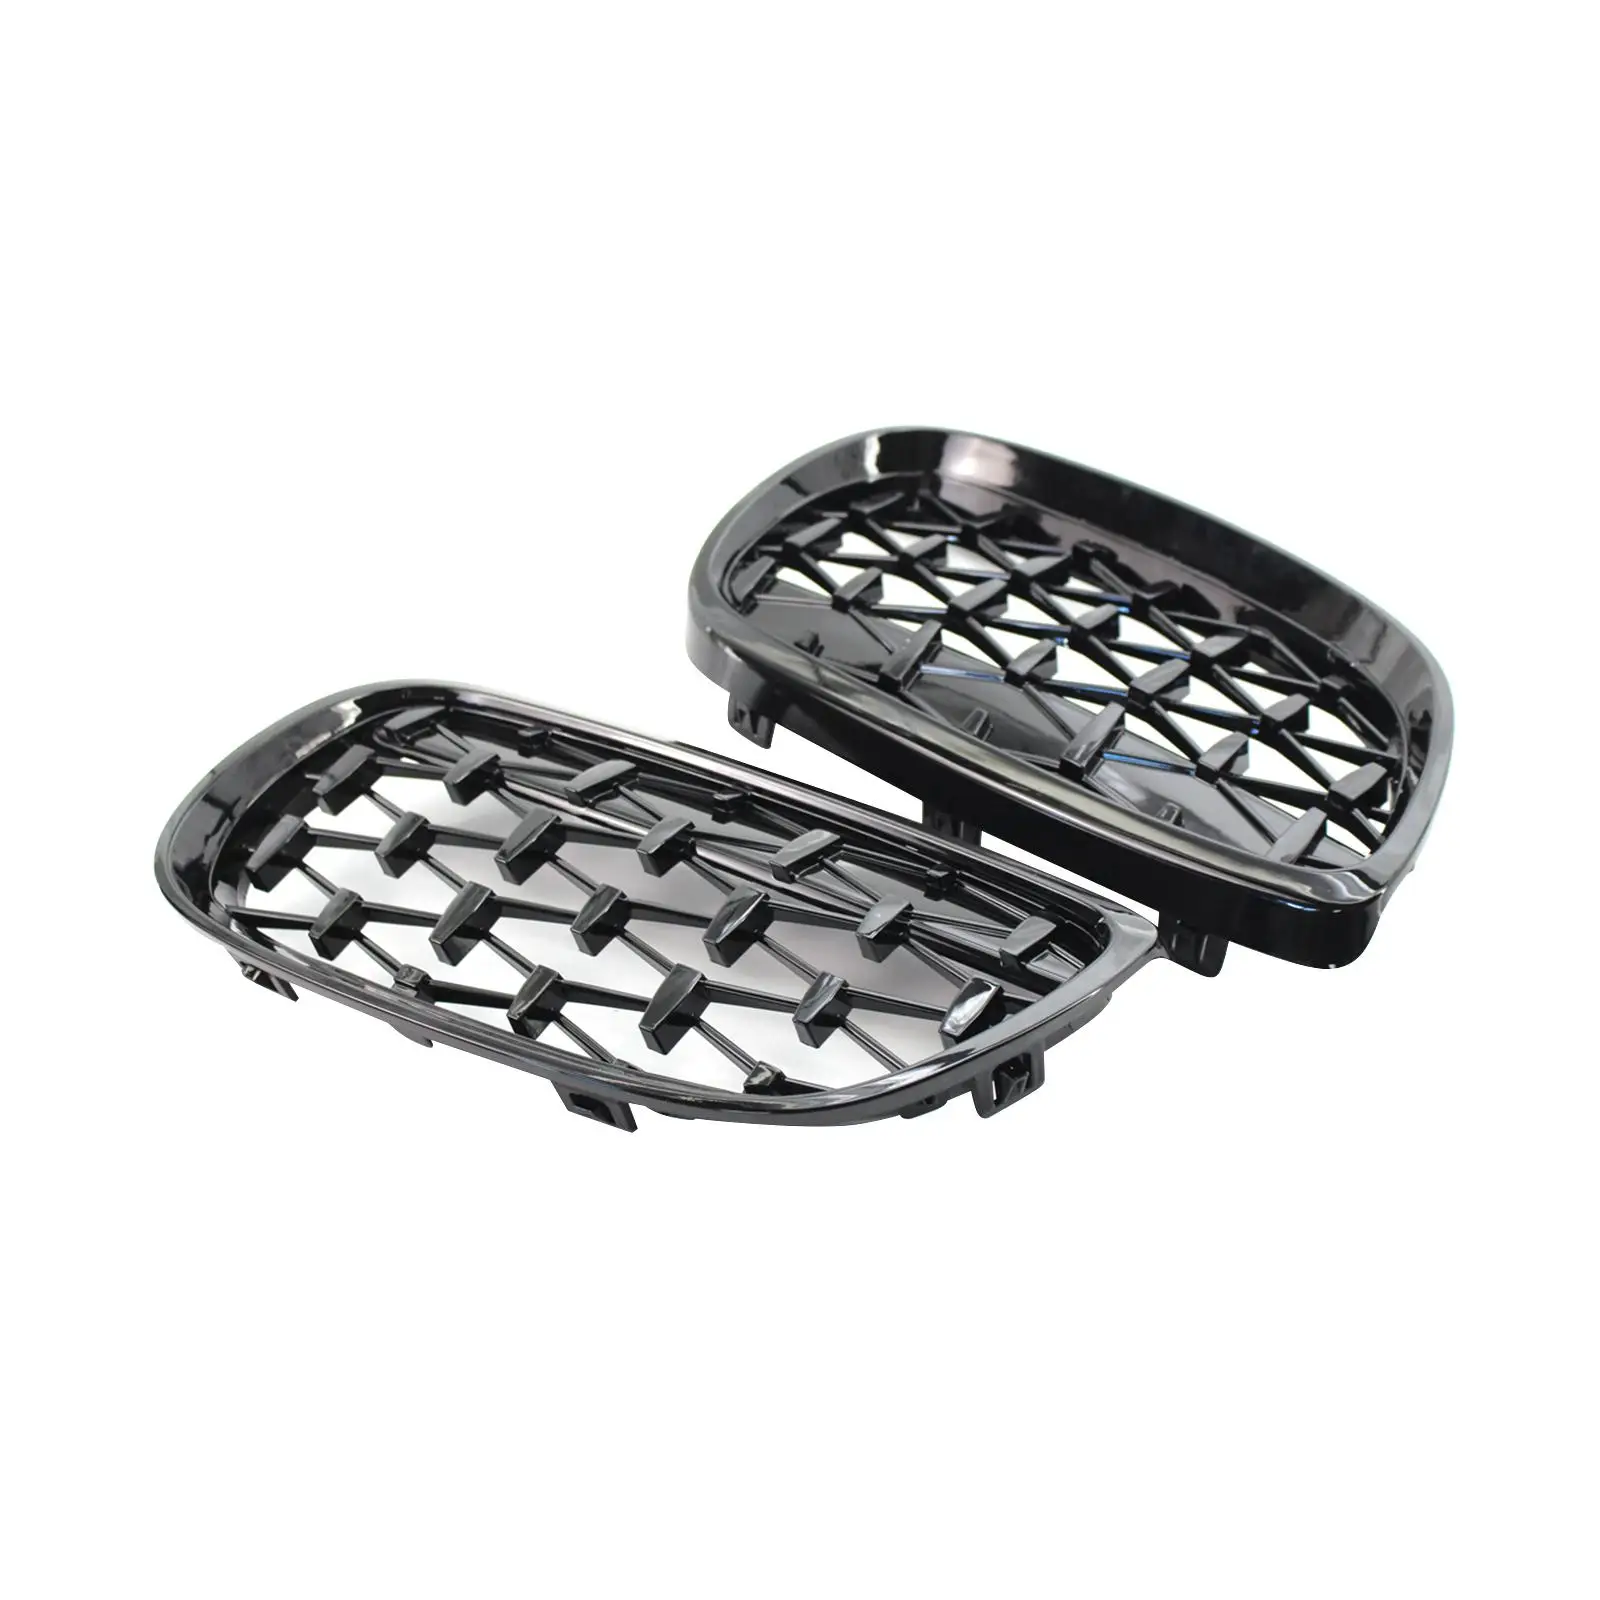 2 Pieces Automotive Front Hood Kidney Grille Grill 51137157277 Left Right for BMW E92 E93 Easy Installation Accessory